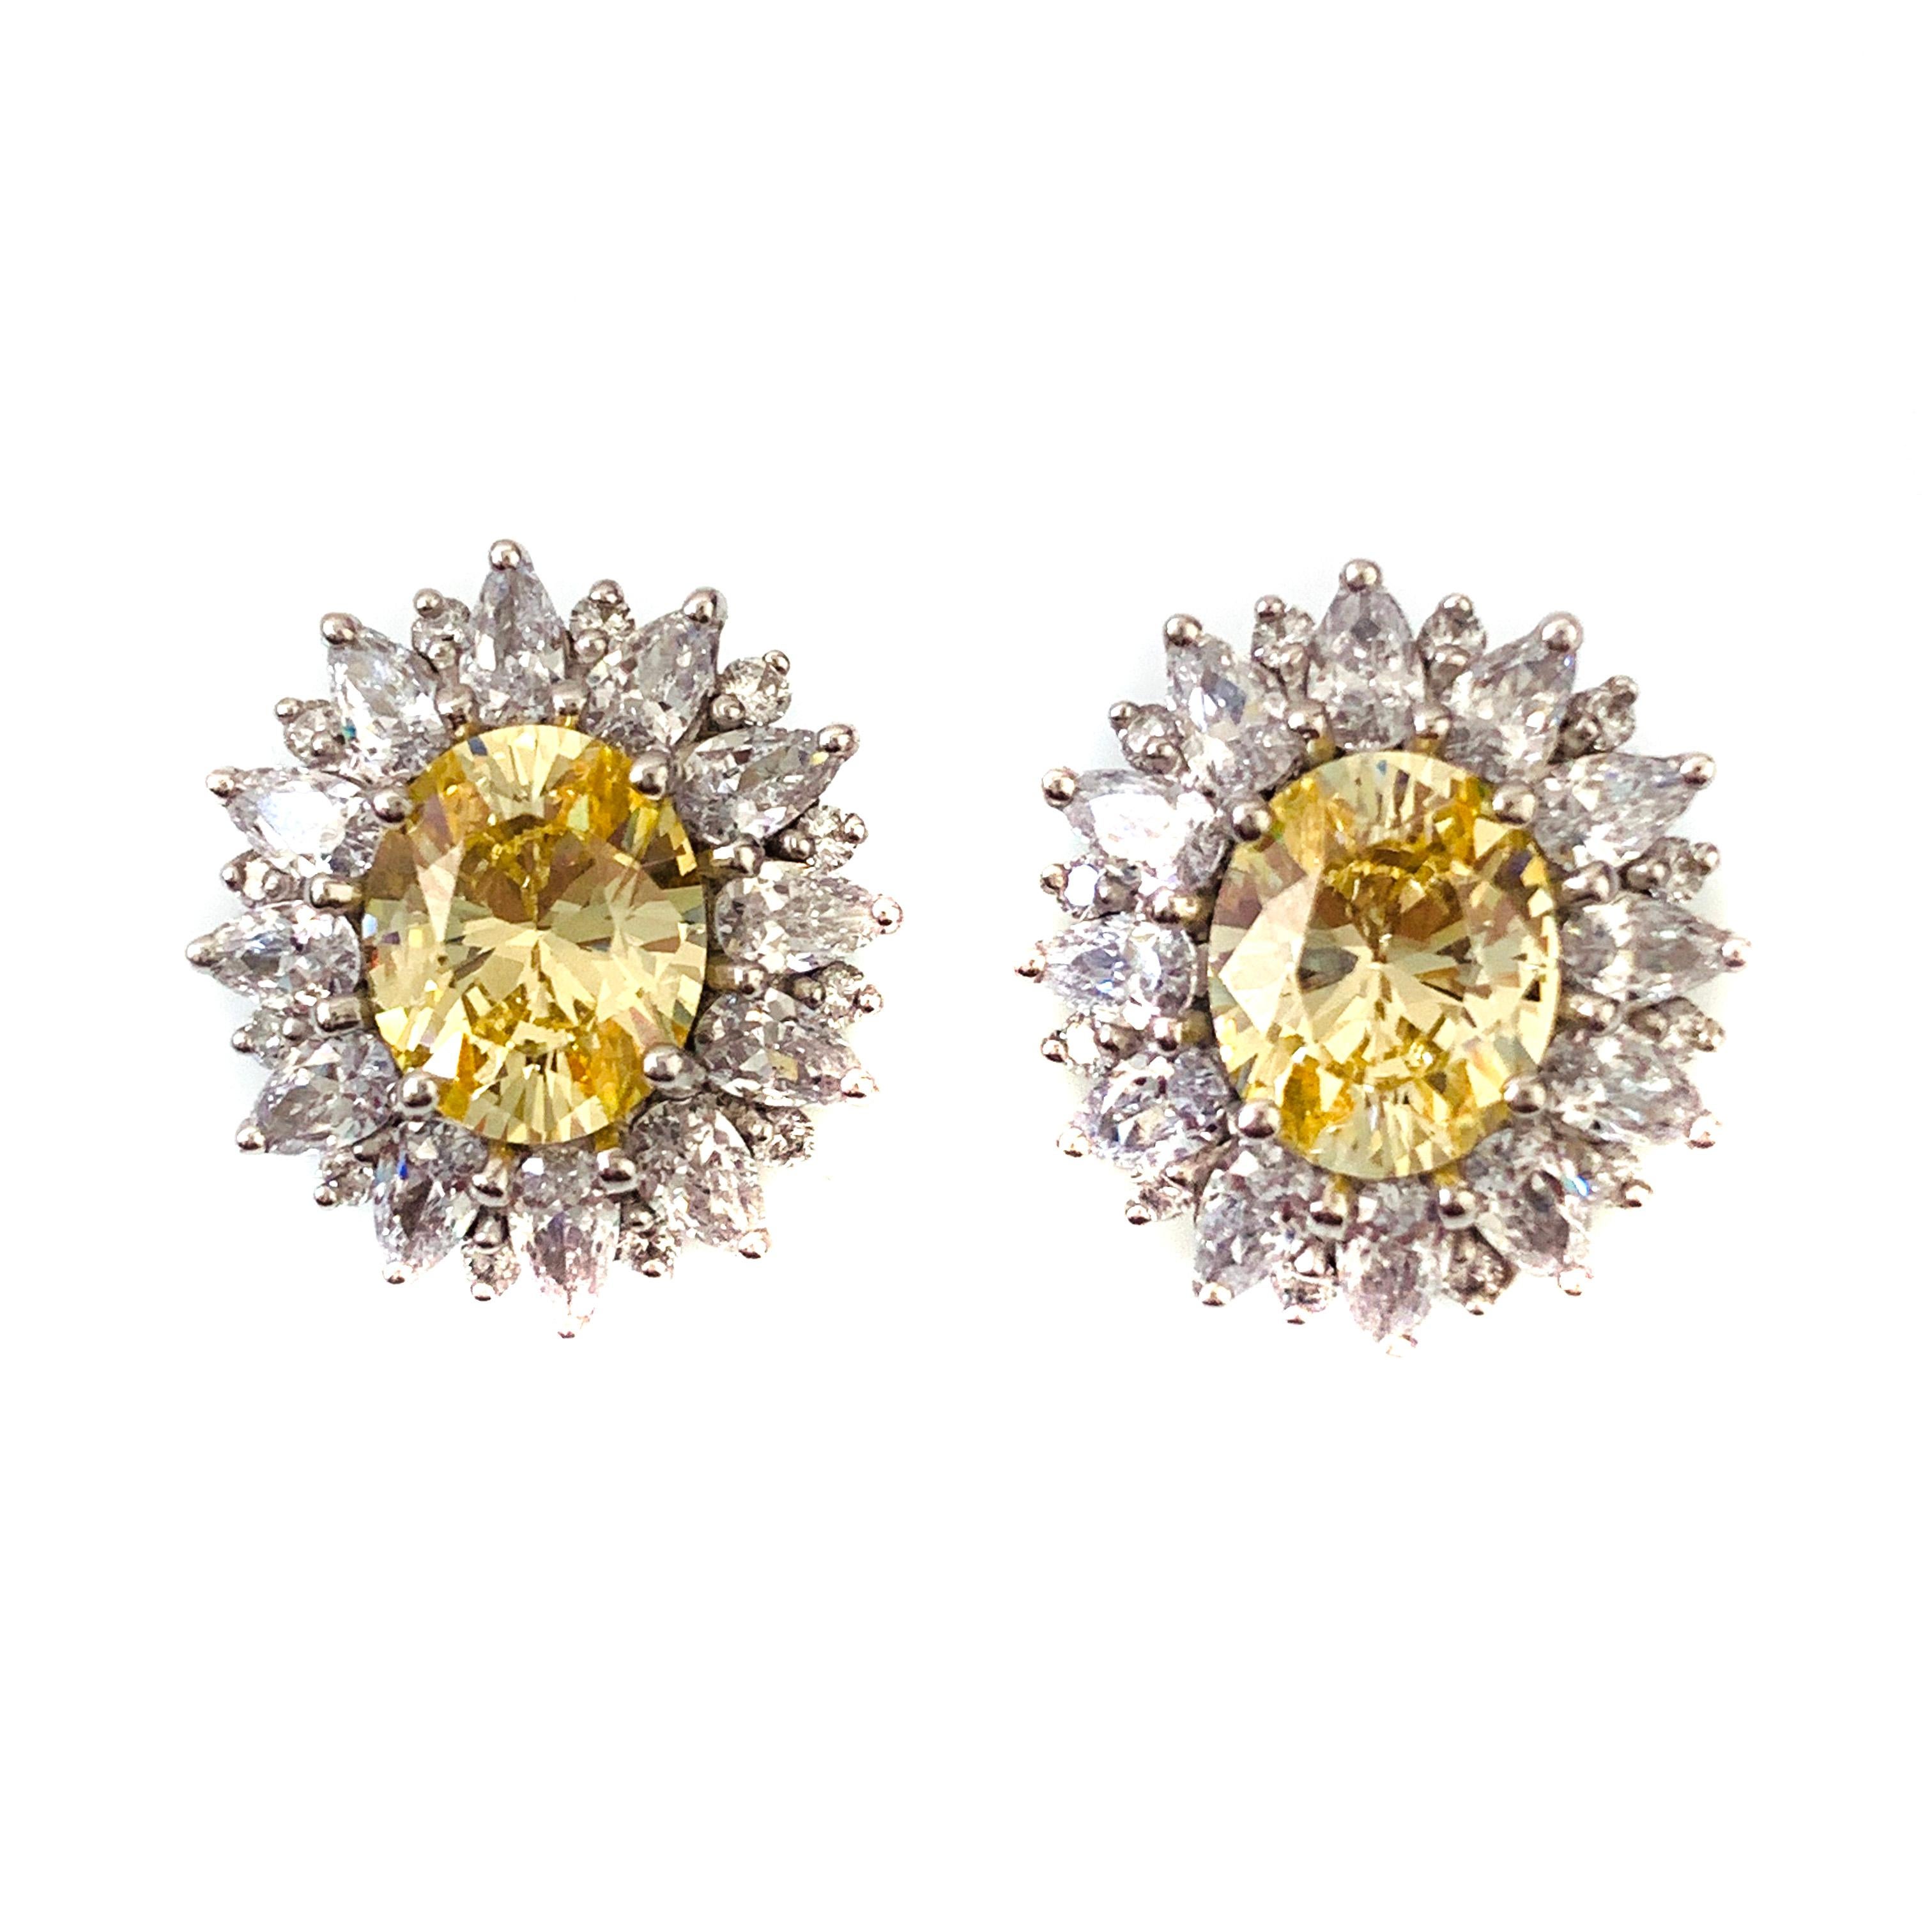 Bijoux Num fabulous faux canary diamond earrings. These earrings feature top quality oval-shape faux canary diamond, adorned with 48 pcs of pear shape and round cubic zirconia, handset in platinum rhodium plated sterling silver. The earrings measure